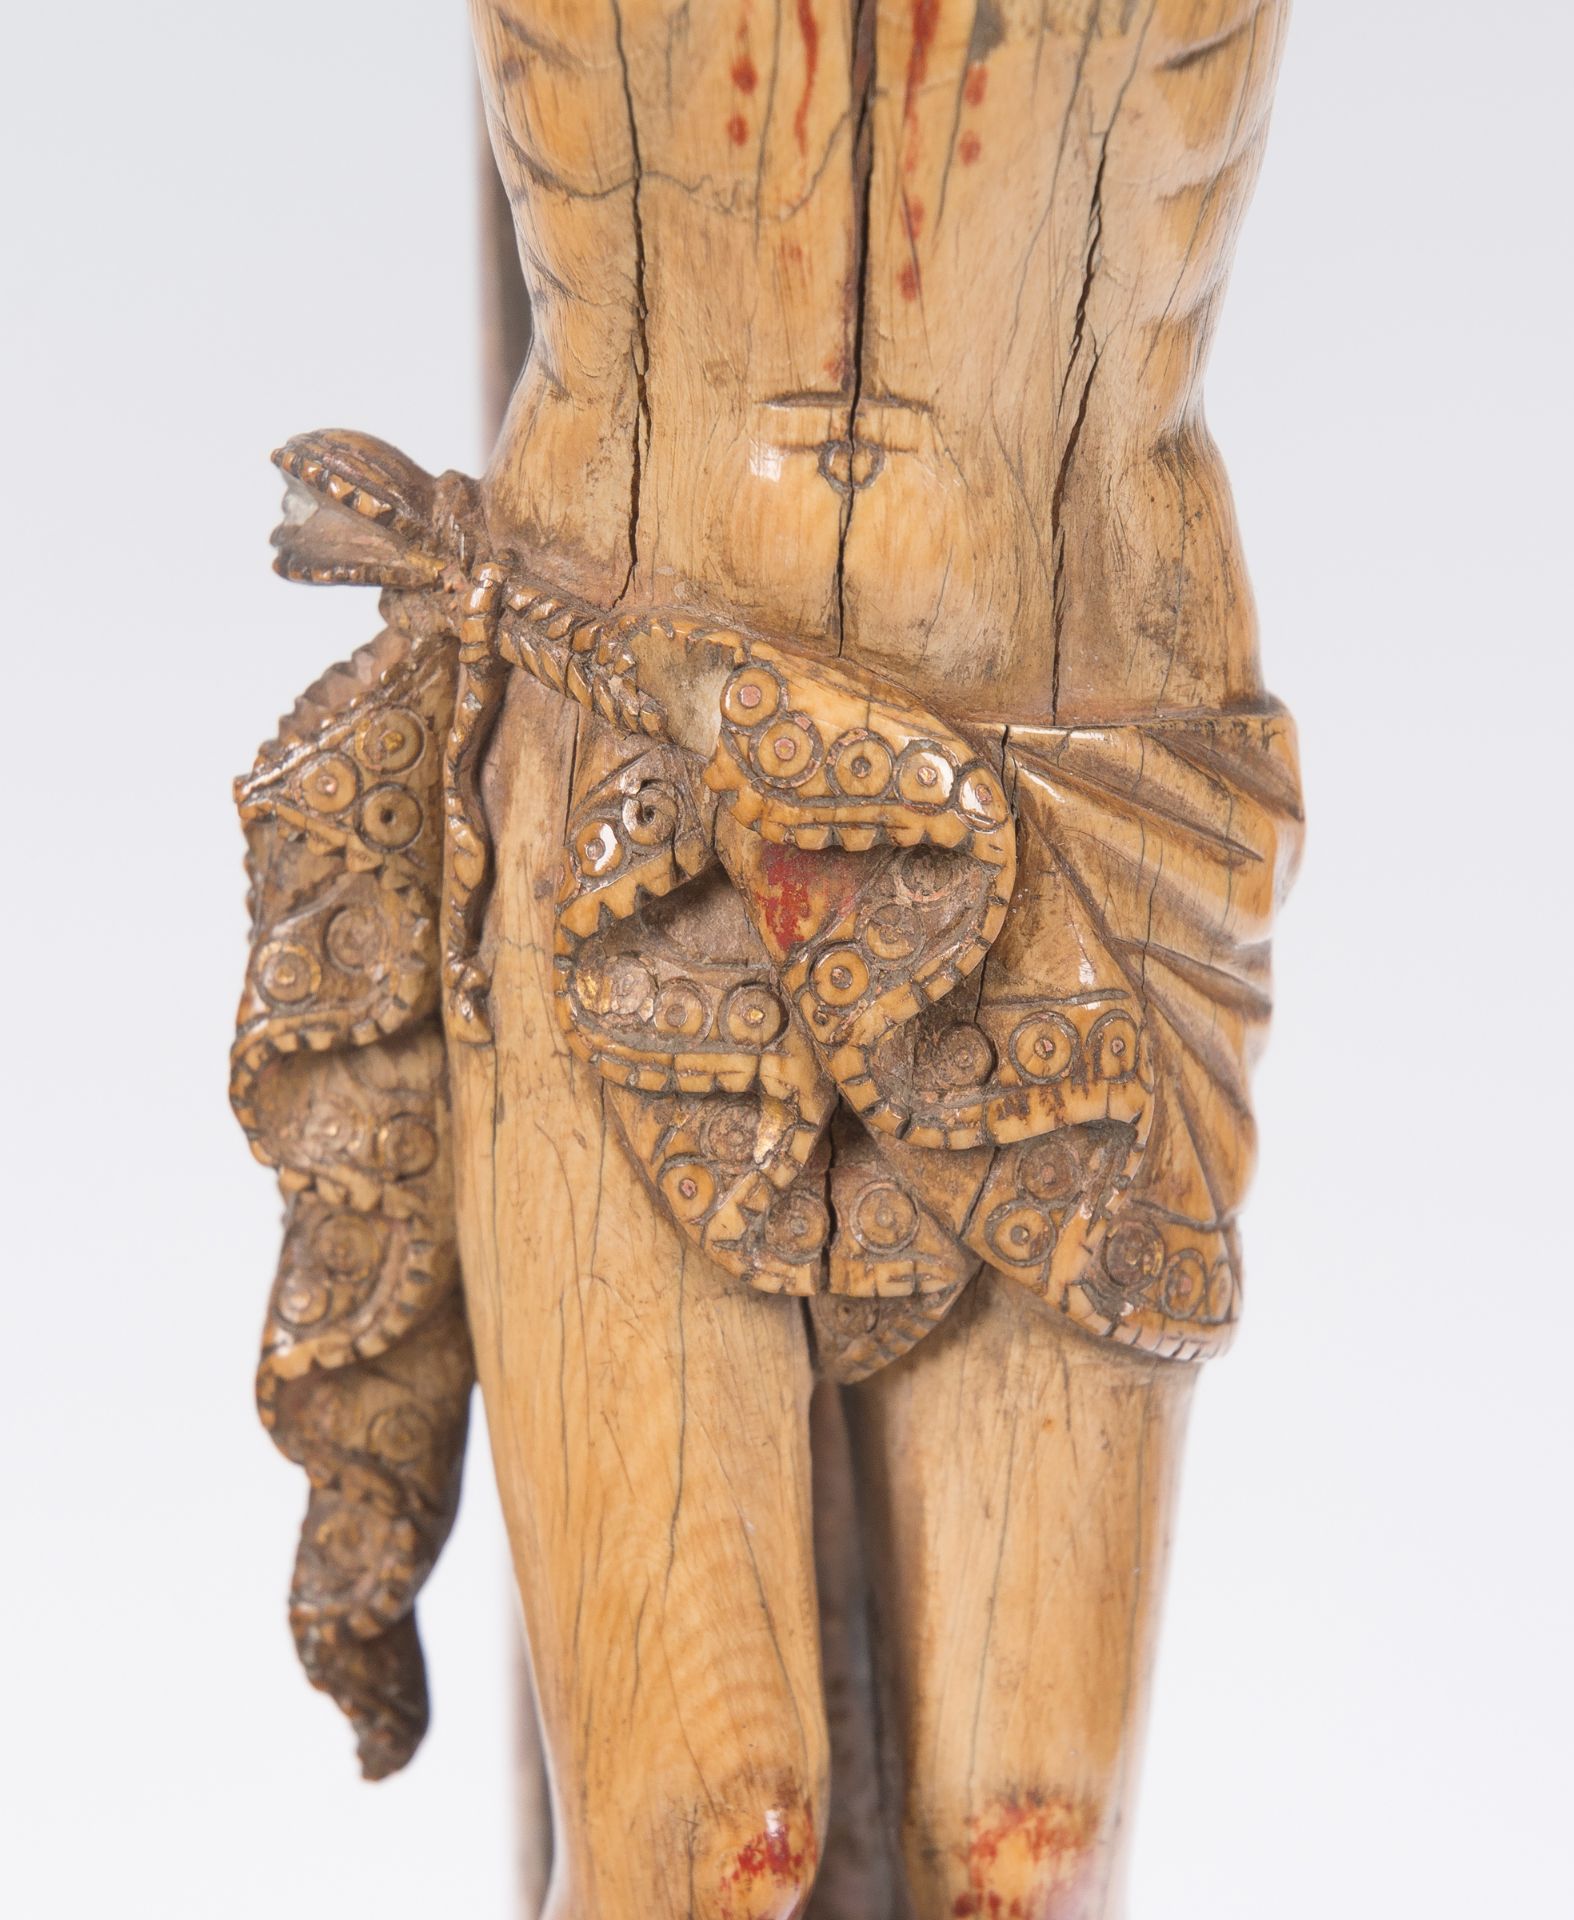 Large cross made of chased and pierced cast silver. Barcelona. 16th century. Sculpted ivory Chris - Image 5 of 7